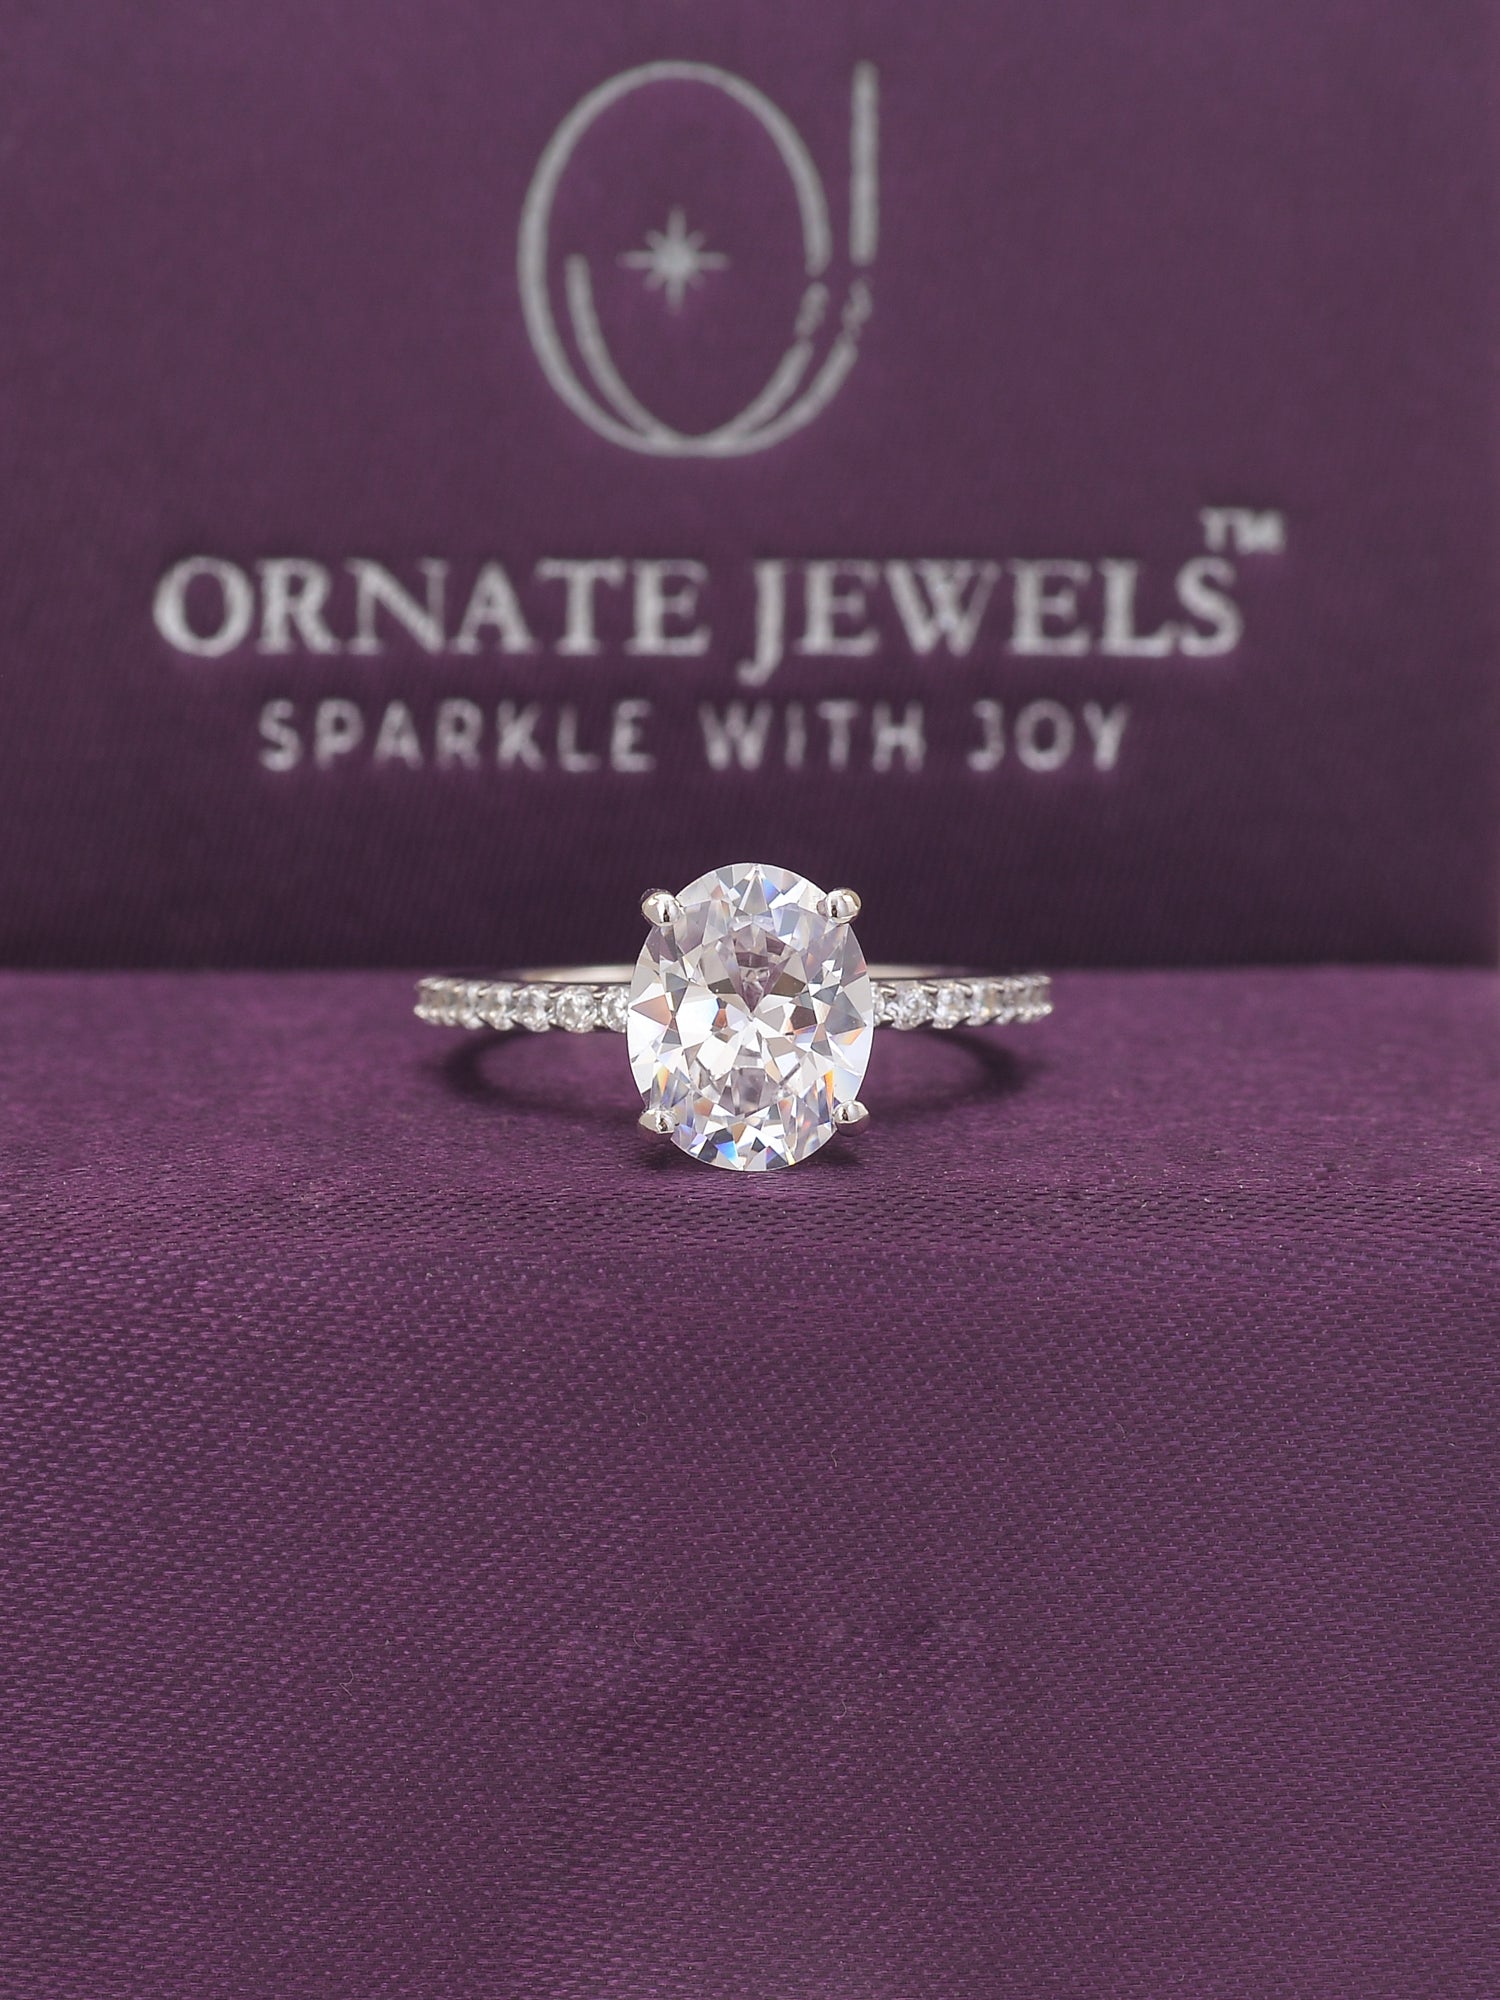 ORNATE JEWELS 4.5 CARAT SOLITAIRE RING FOR WOMEN-1